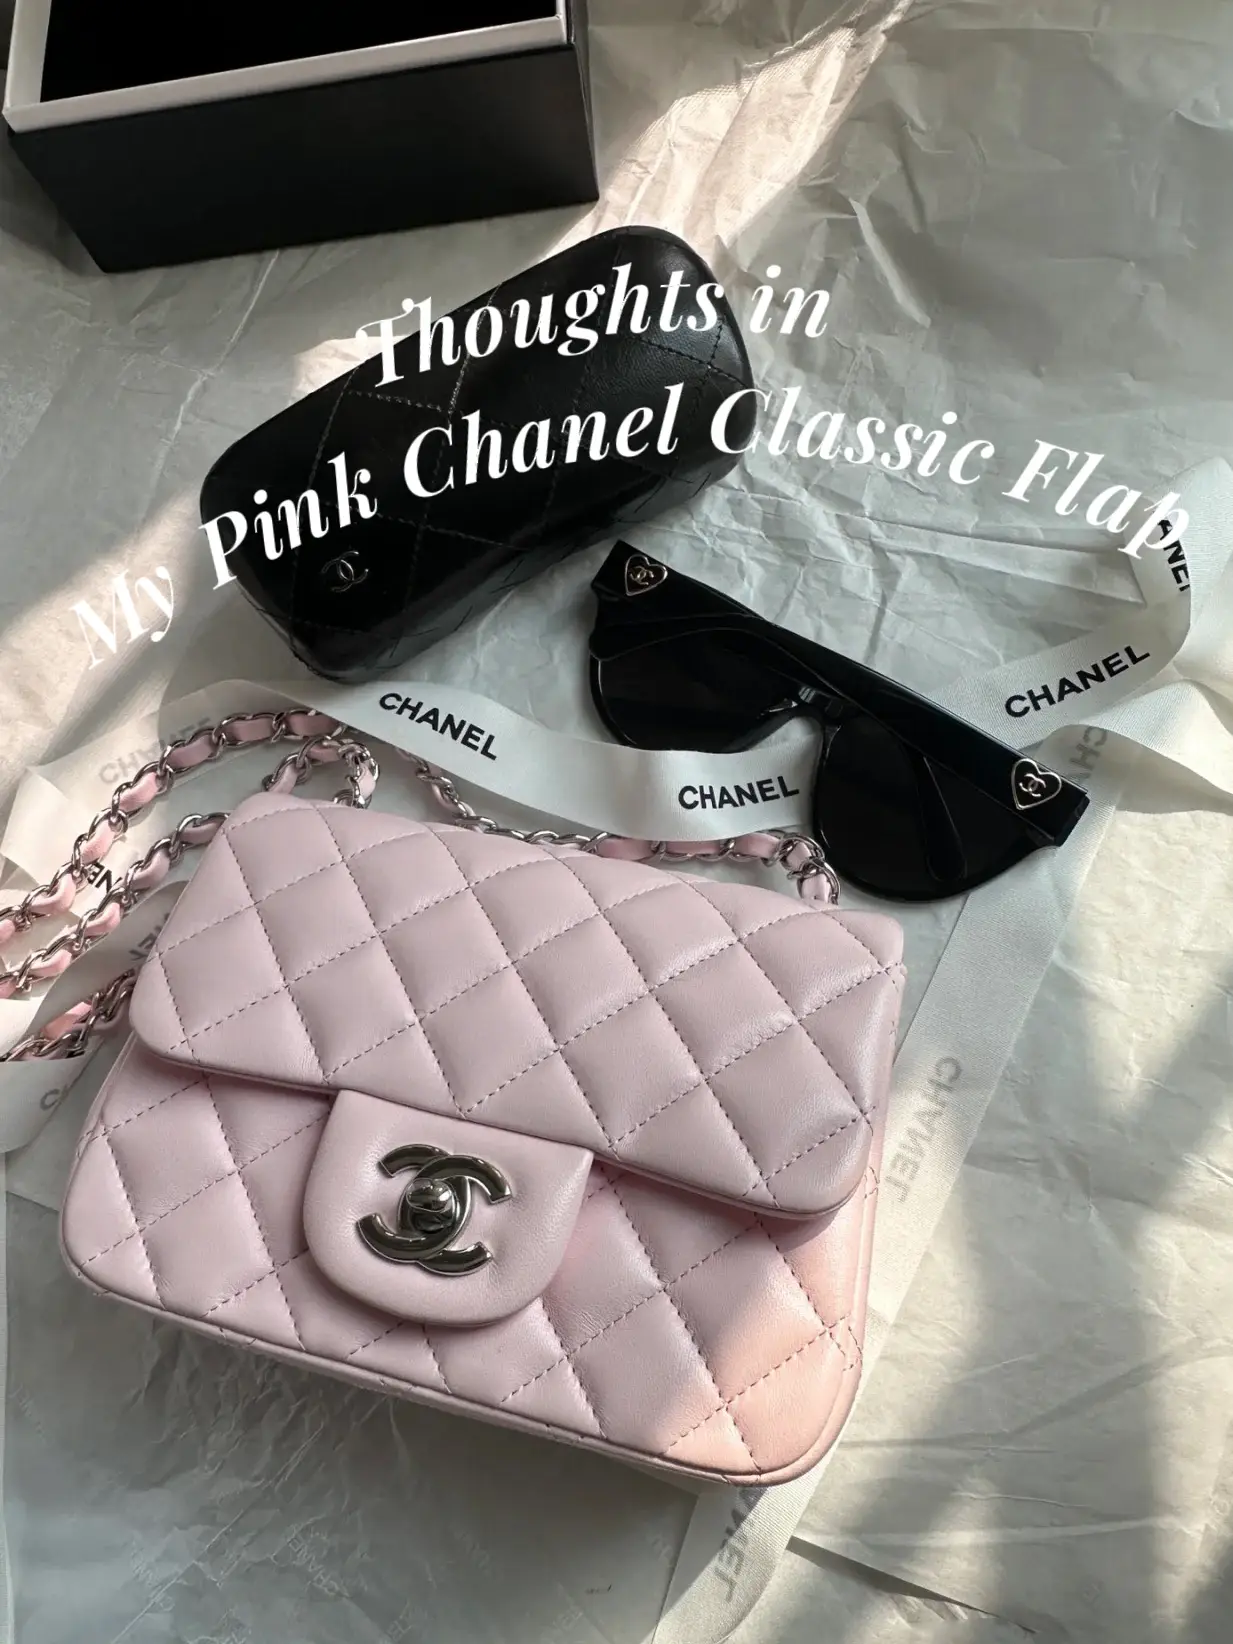 Thoughts in My Pink Chanel Classic Flap, Gallery posted by Ashy Patterson